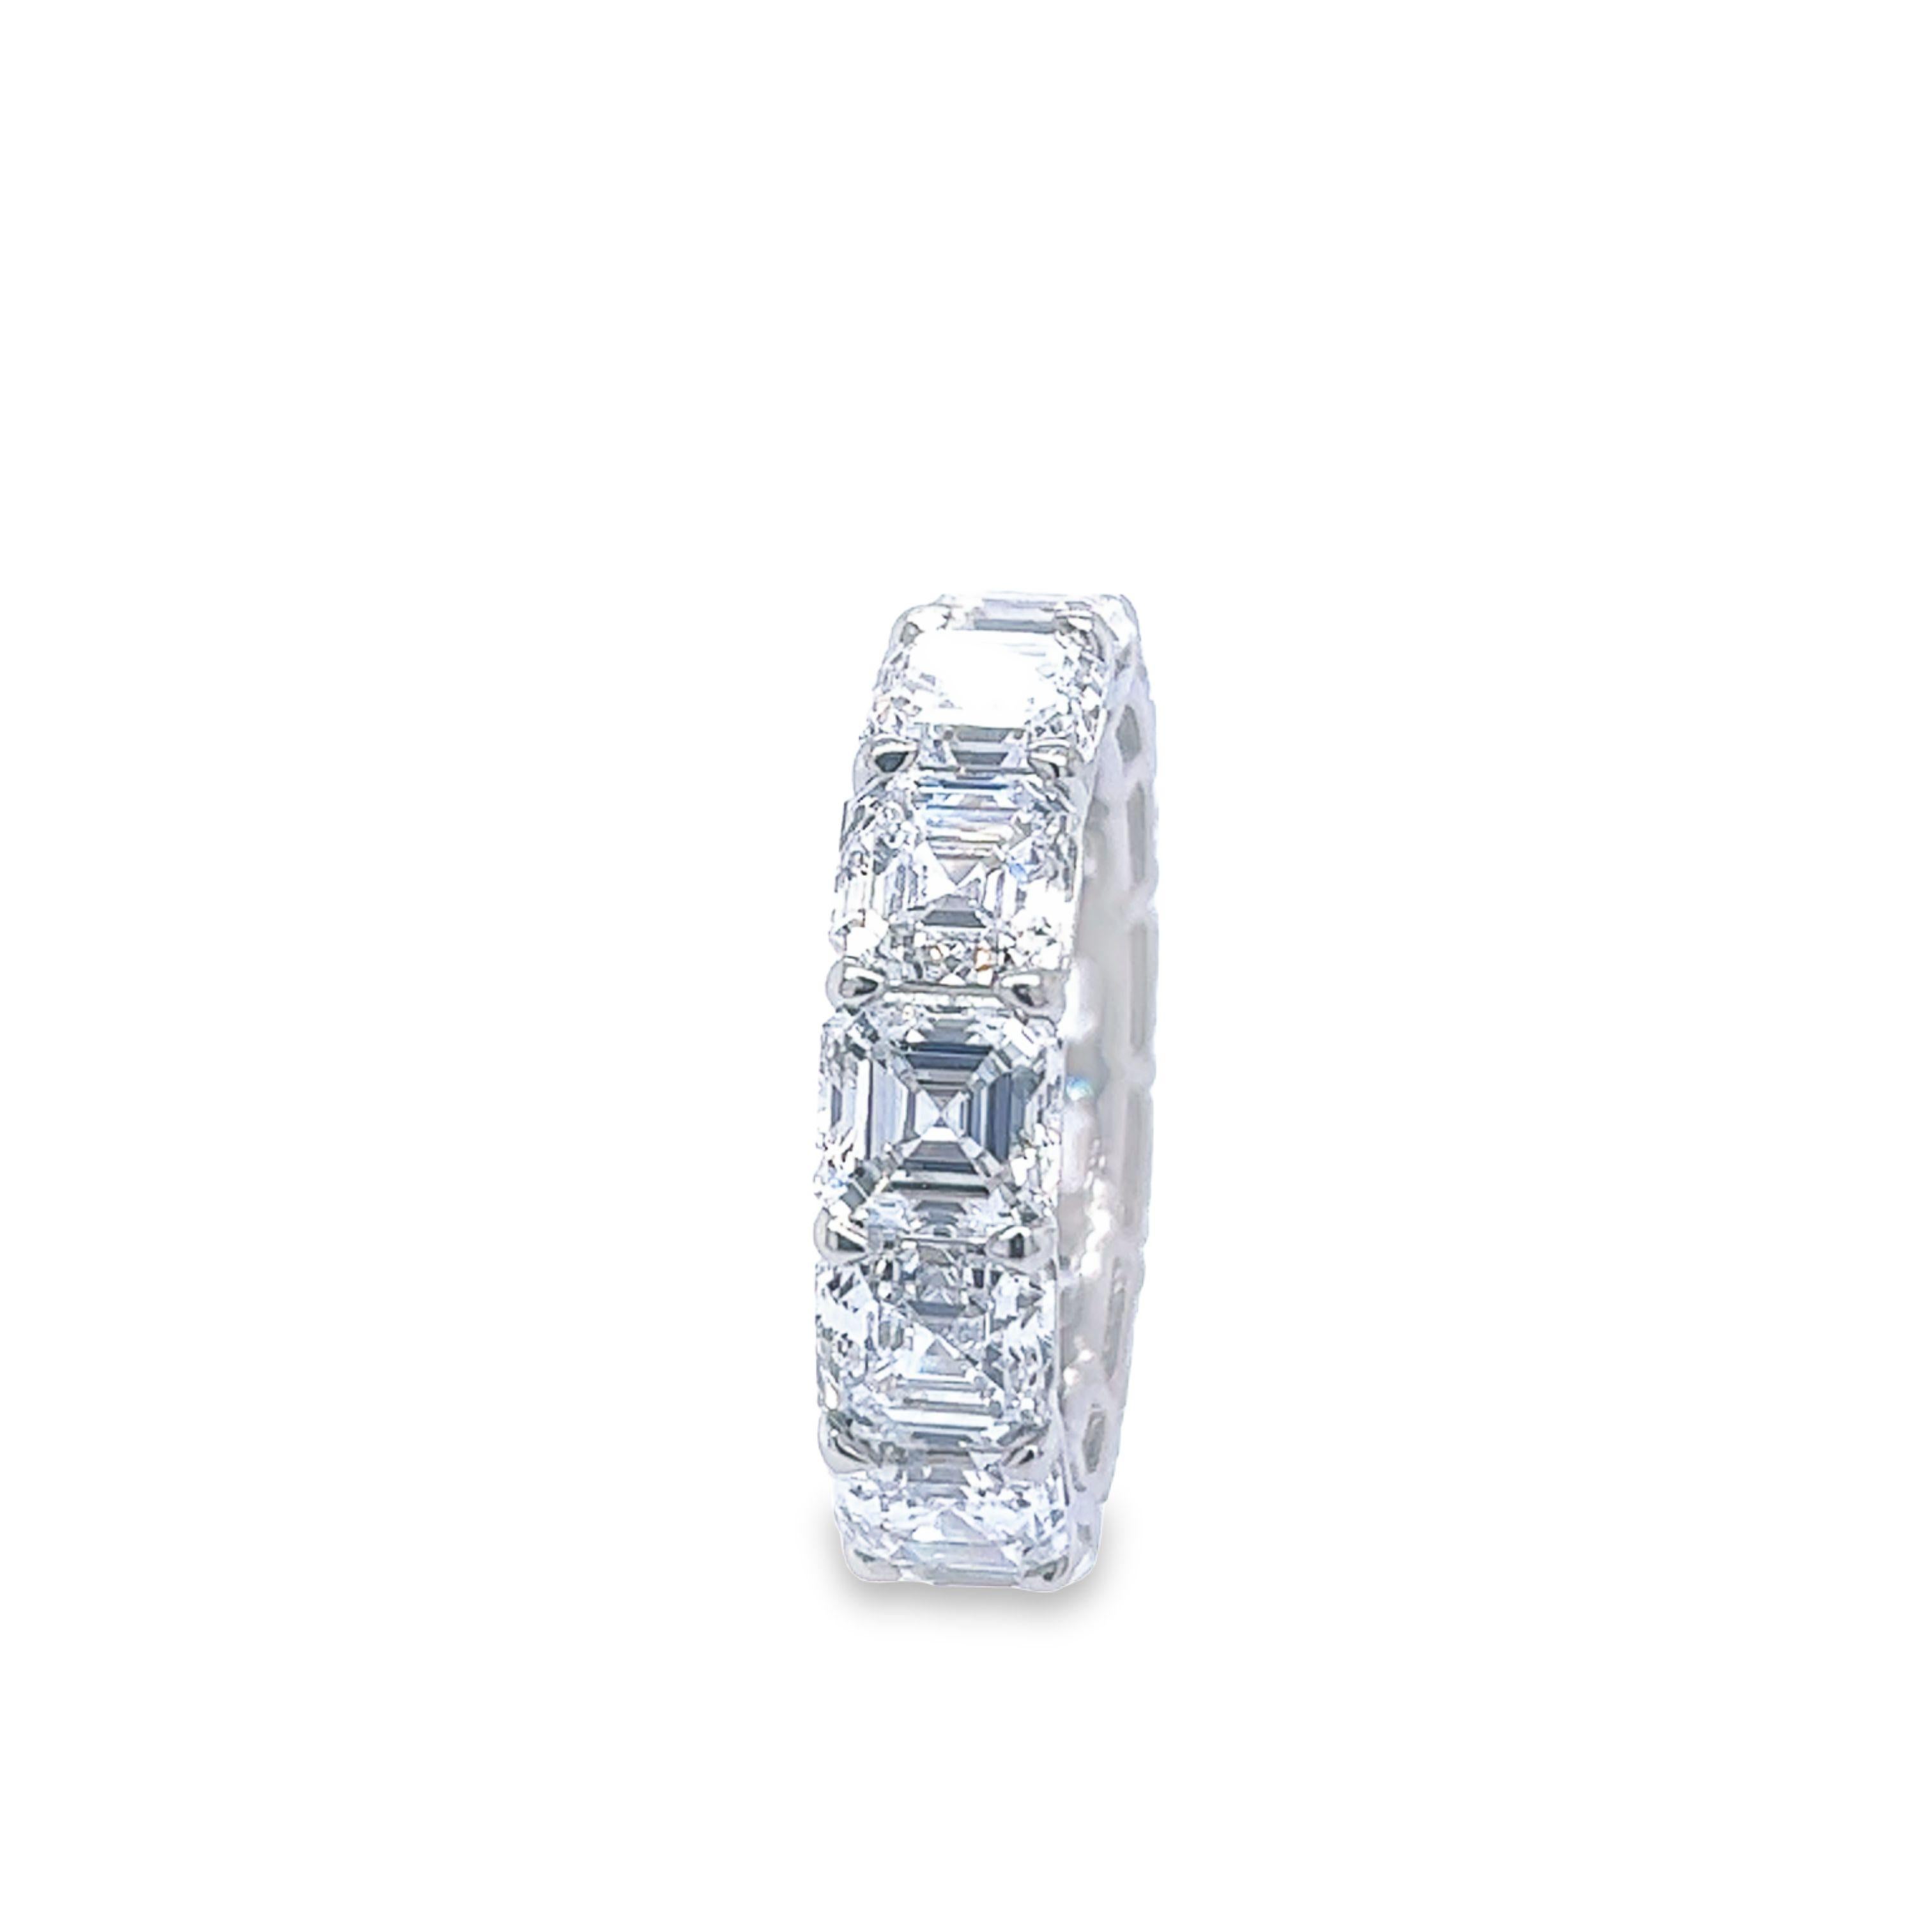 David Rosenberg 13.16 Total Carats Asscher Cut GIA Diamond Eternity Wedding Band In New Condition For Sale In Boca Raton, FL